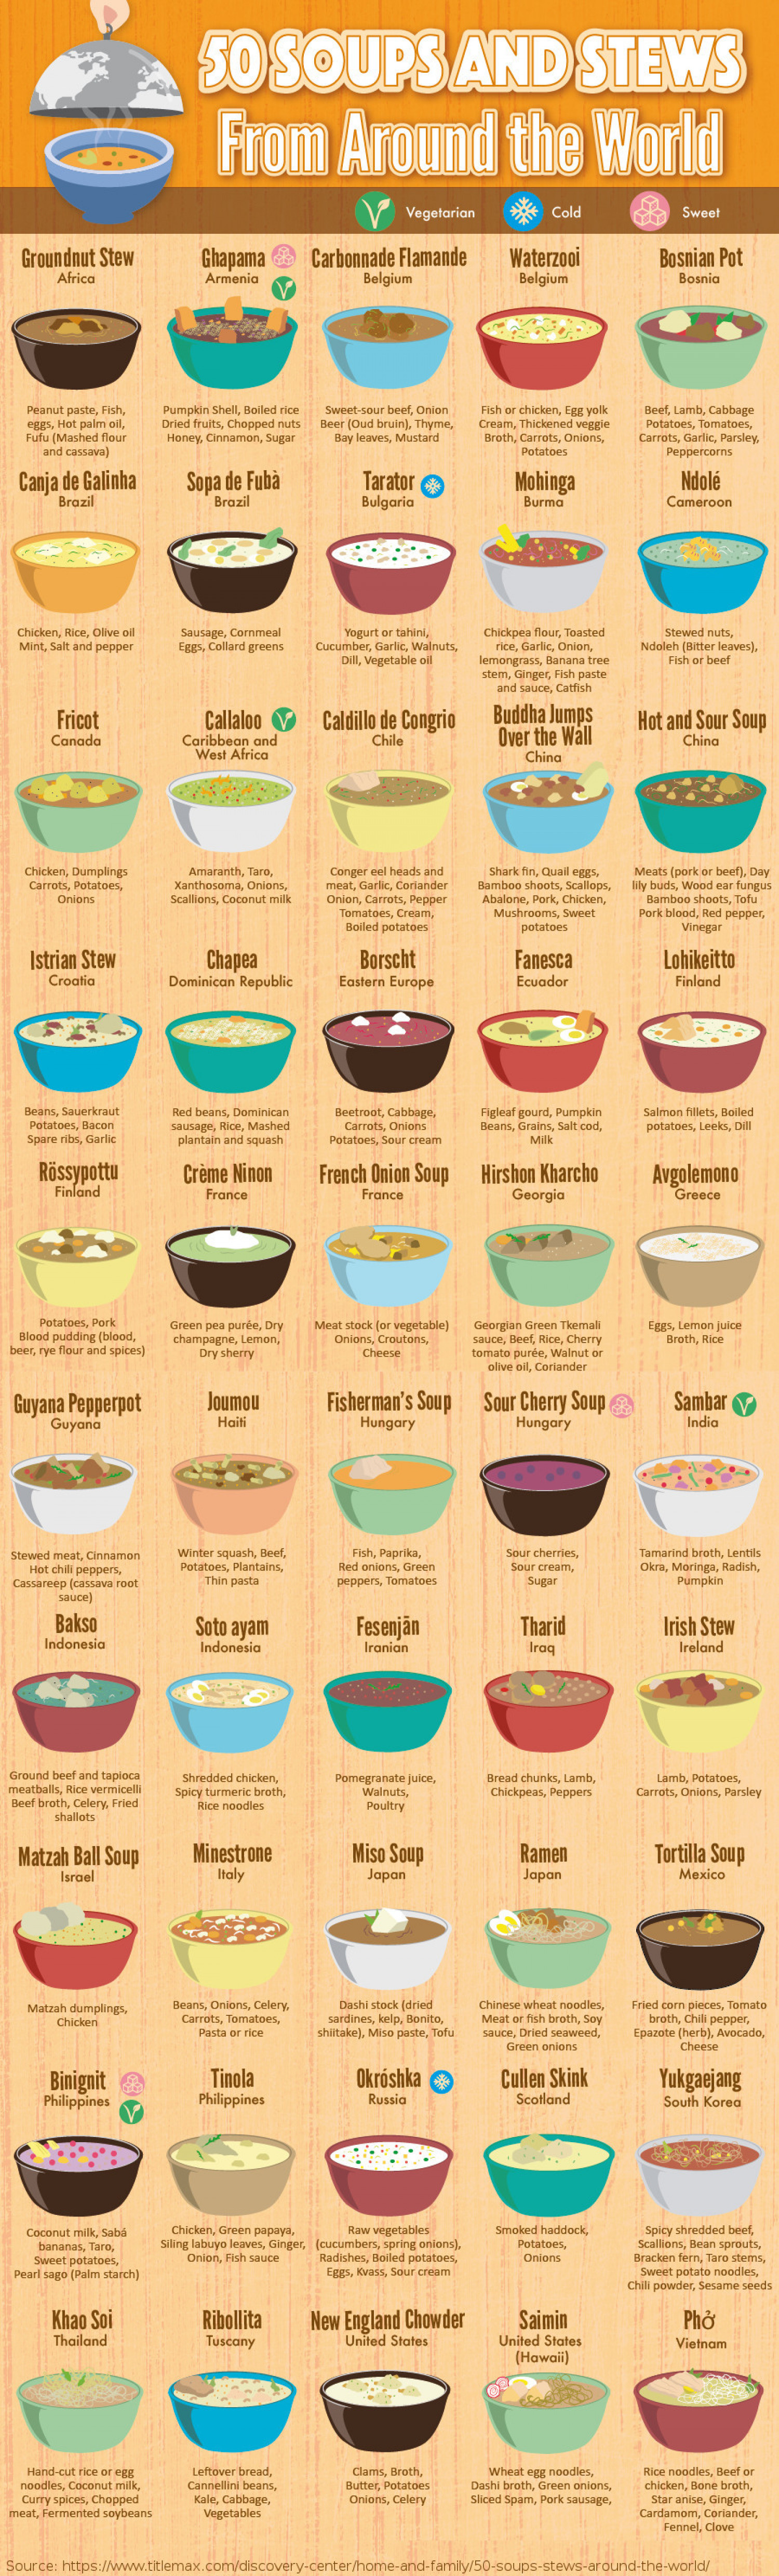 50 Soups and Stews From Around the World  Infographic